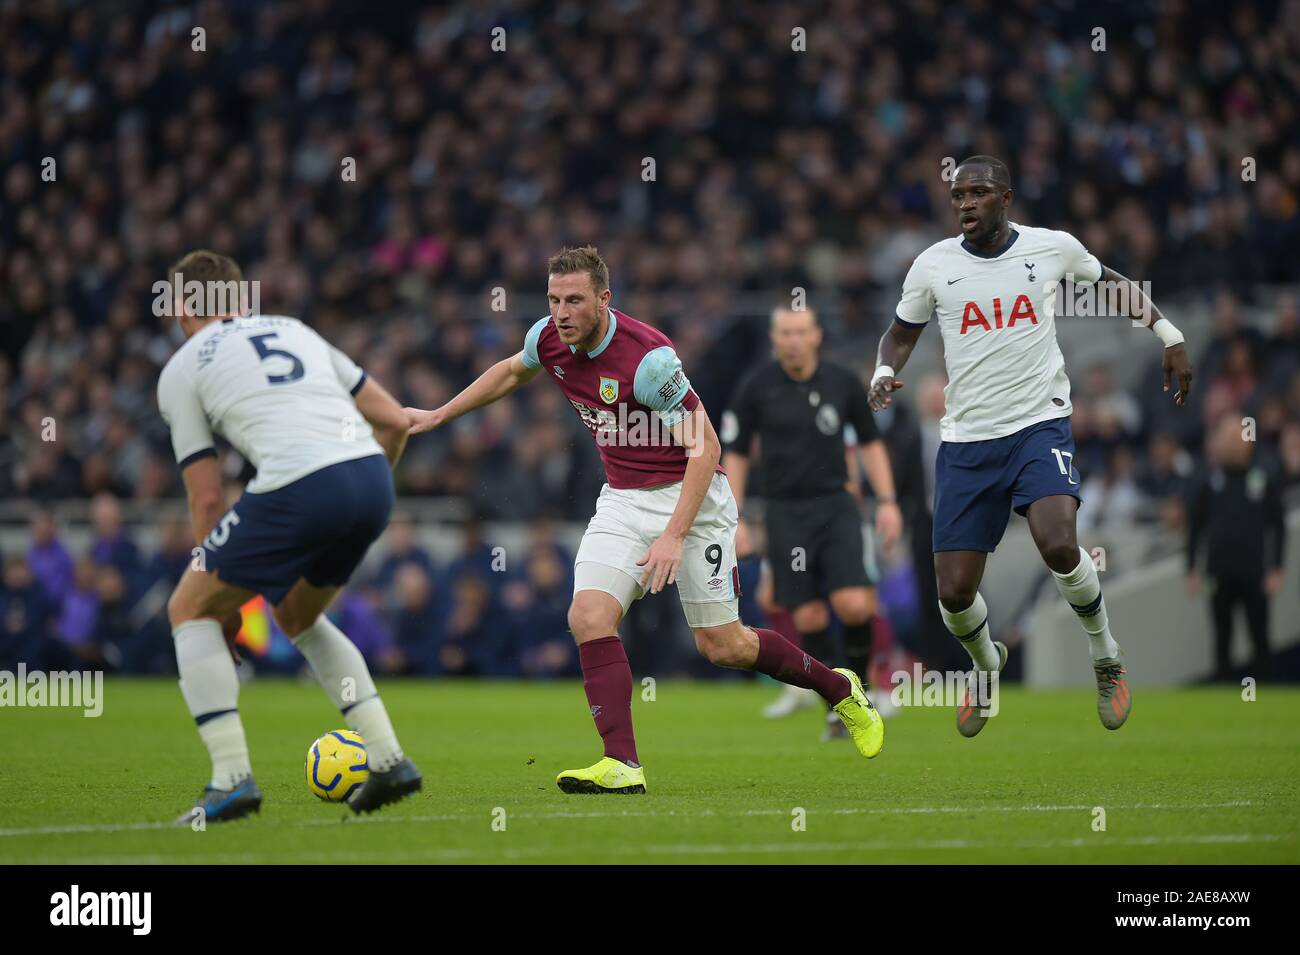 London, UK. 7th December 2019. Chris Wood of Burnley runs at the Spurs defence during the Tottenham Hotspur vs Burnley Premier League Football match at the Tottenham Hotspur Stadium on 7th December 2019-EDITORIAL USE ONLY No use with unauthorised audio, video, data, fixture lists (outside the EU), club/league logos or 'live' services. Online in-match use limited to 45 images (+15 in extra time). No use to emulate moving images. No use in betting, games or single club/league/player publications/services- Credit: Martin Dalton/Alamy Live News Stock Photo